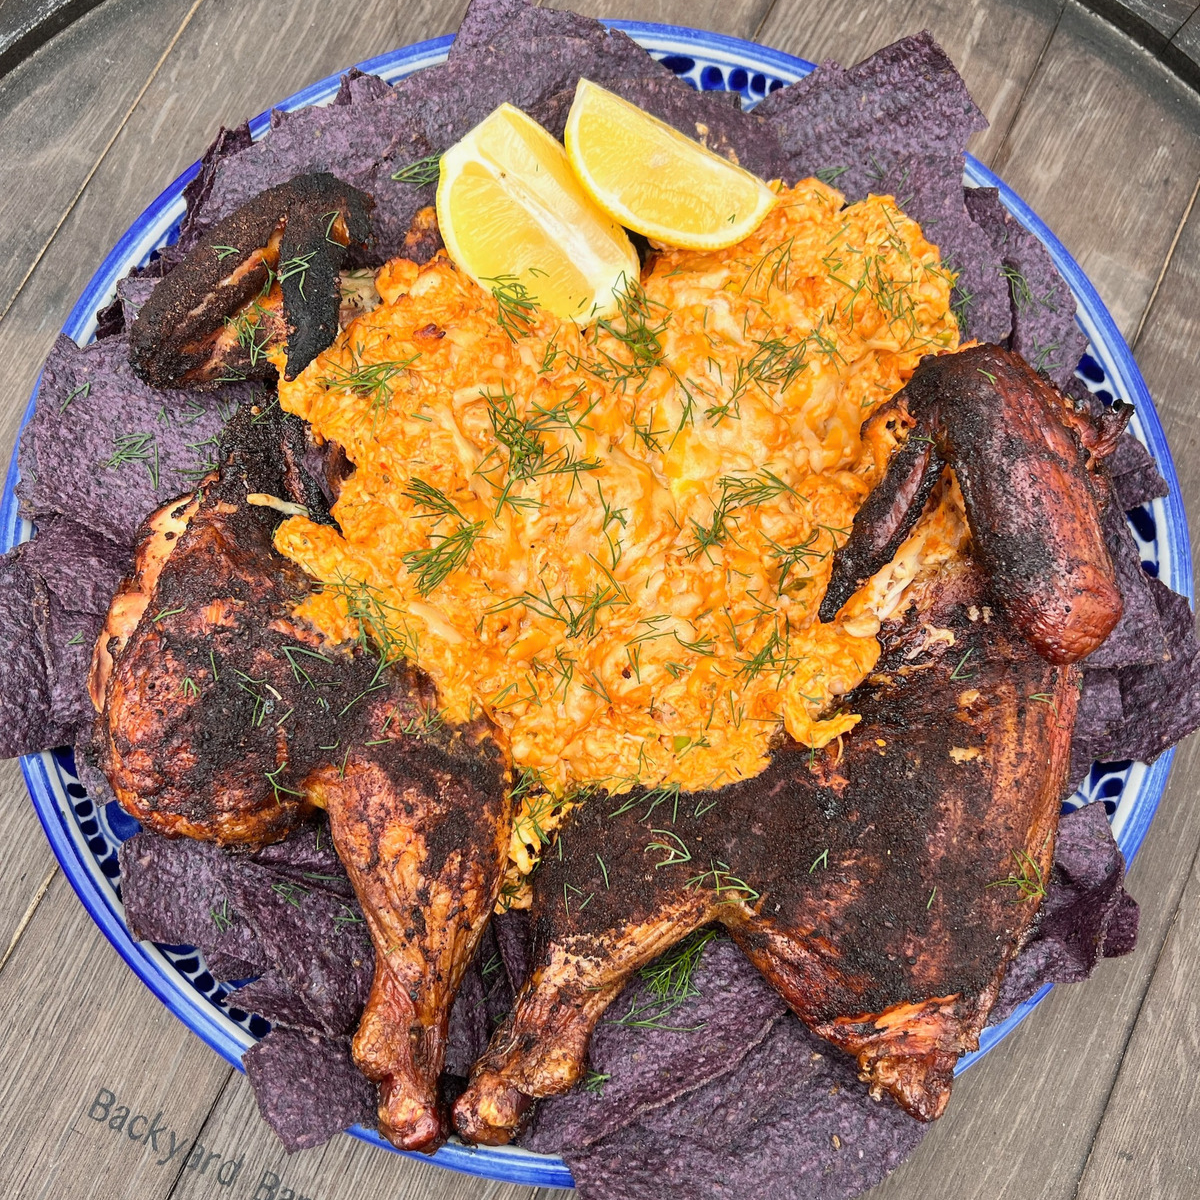 smoked chicken stuffed with buffalo chicken dip on a bed of blue corn tortillas